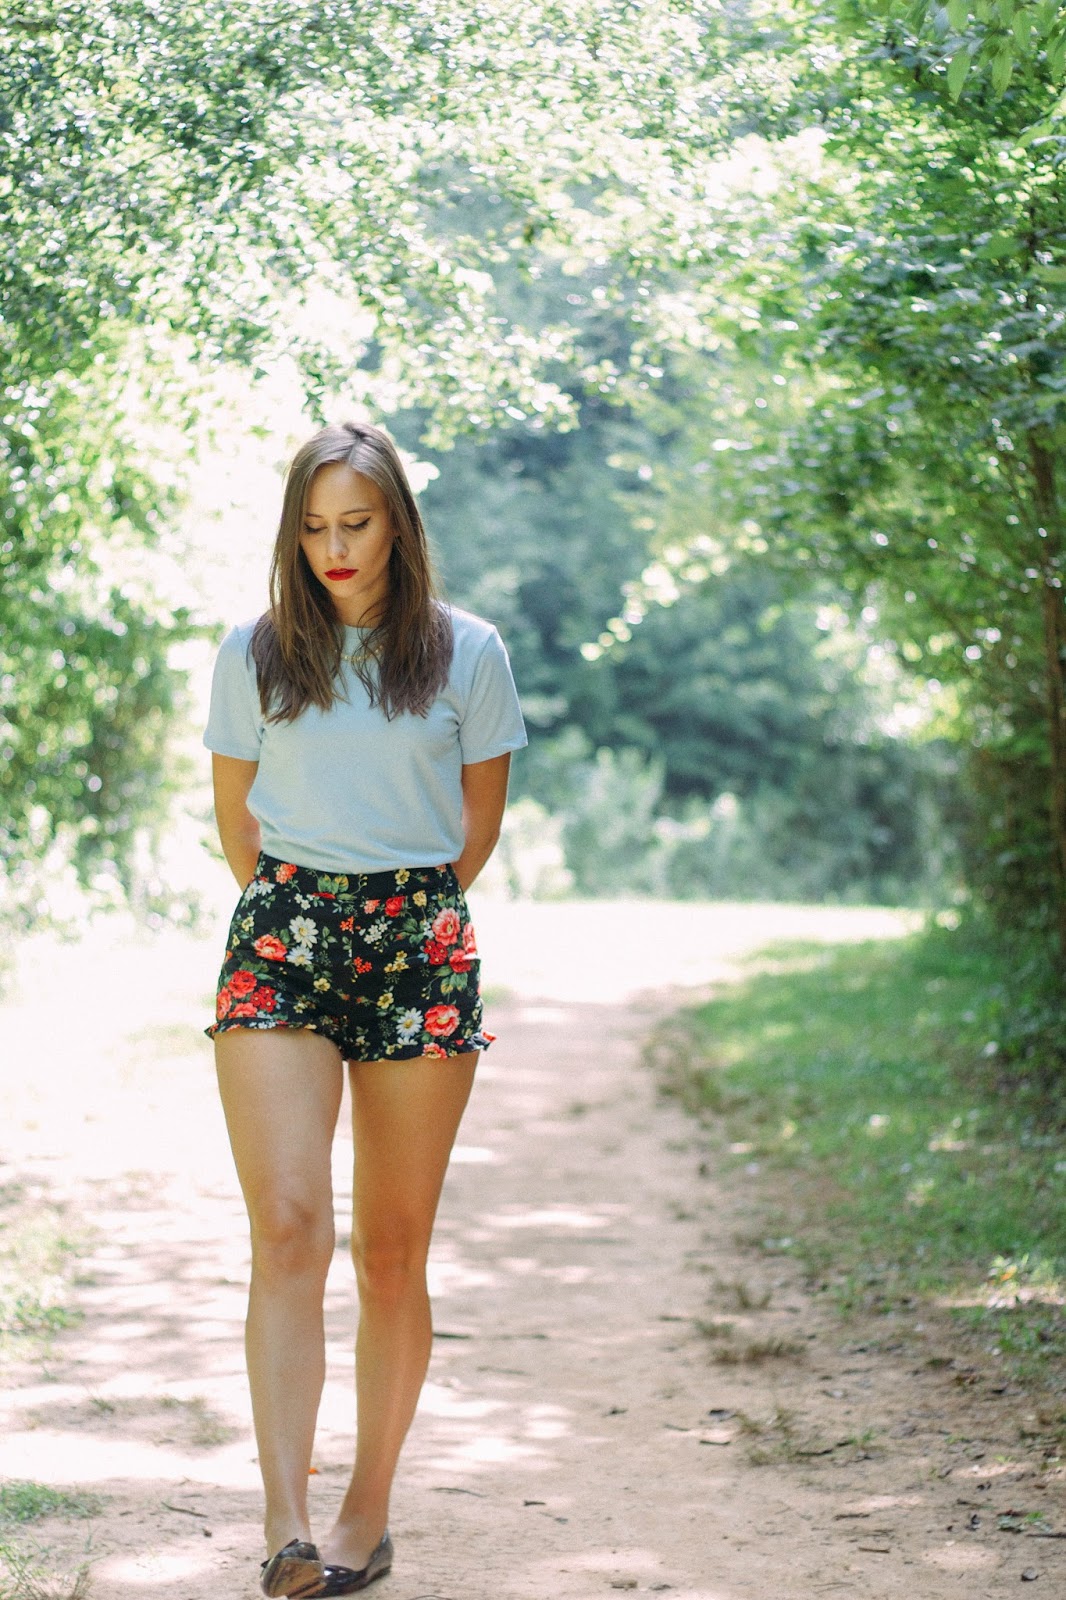 style, vintage, retro, vintage style, retro style, floral high waisted shorts, forever 21, girly outfit, classy style, summer, fashion blogger, personal style blogger, film blogger, film, photography, whimsical, taylor swift style, screenwriting,